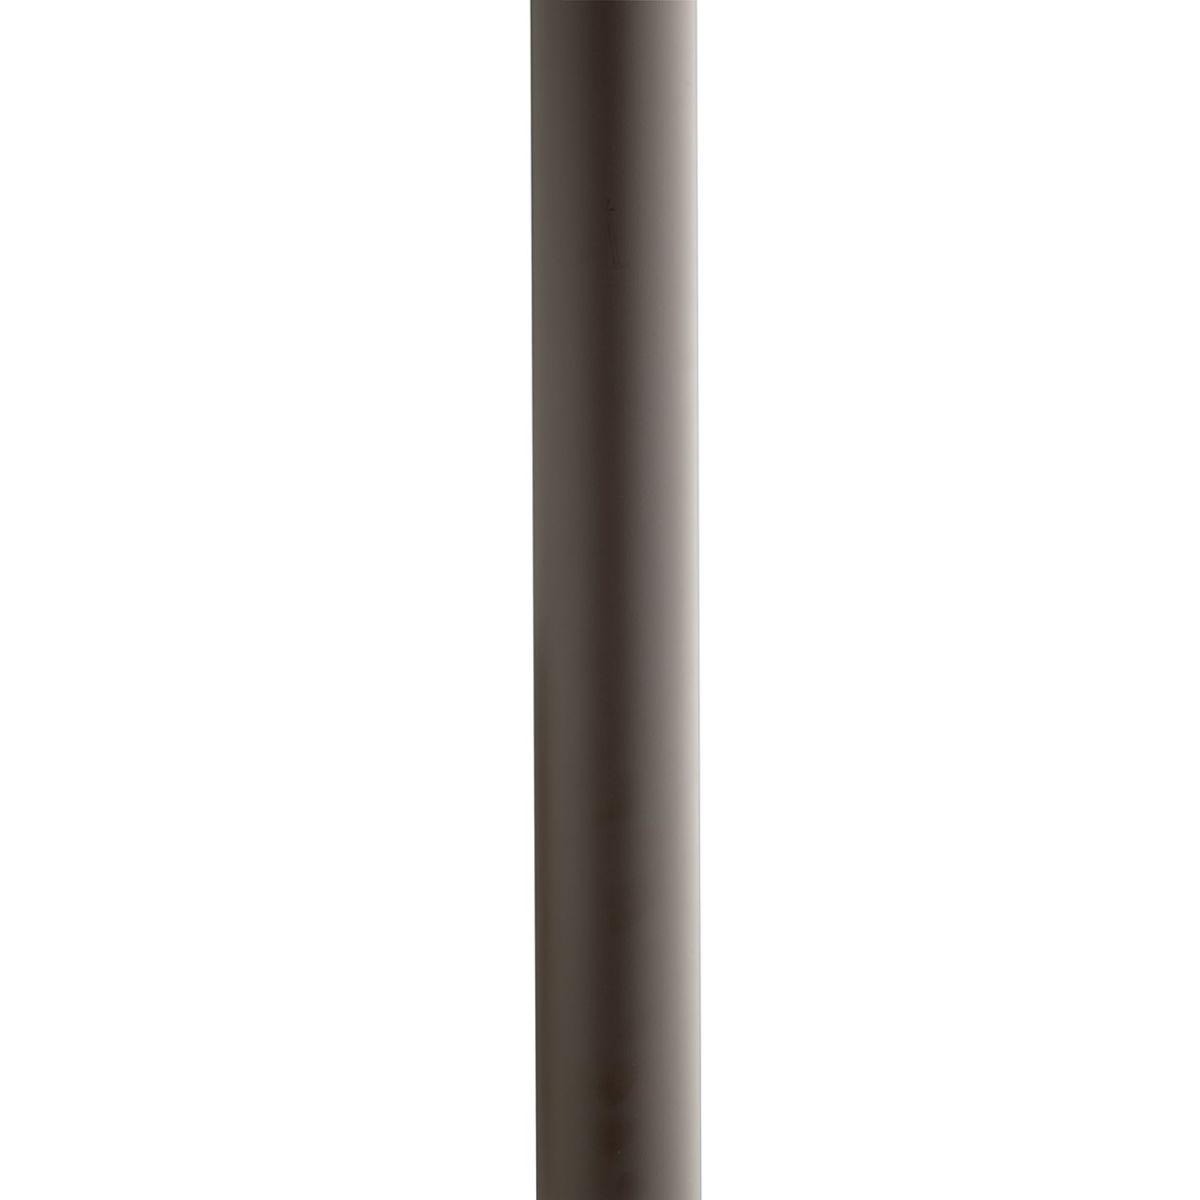 7 Feet Round Aluminum Direct Burial Pole With Ladder Rest3 In. Shaft Bronze finish